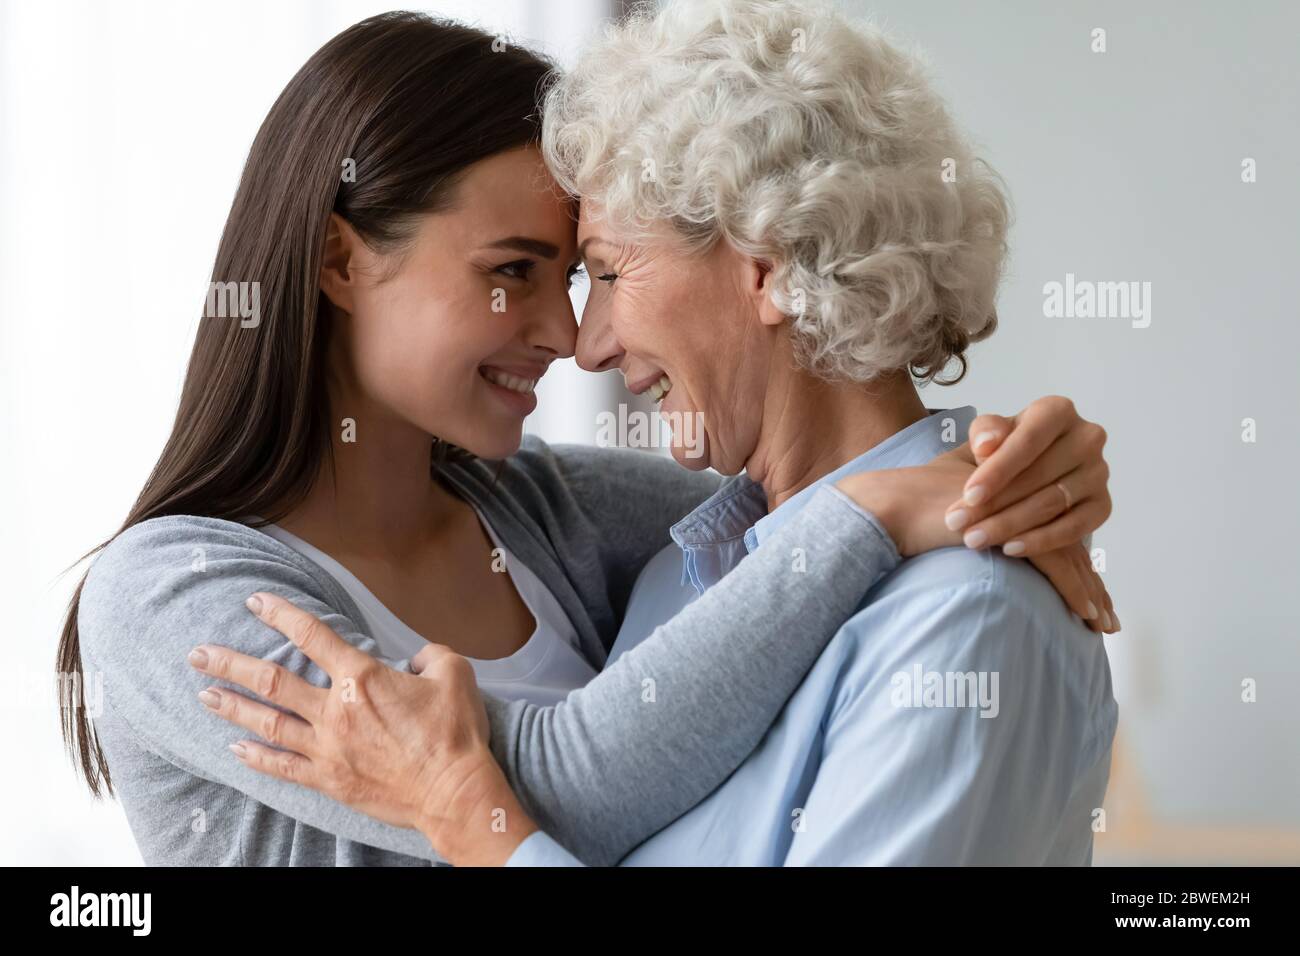 Pretty retired grandmother and grownup granddaughter touch noses showing affection Stock Photo